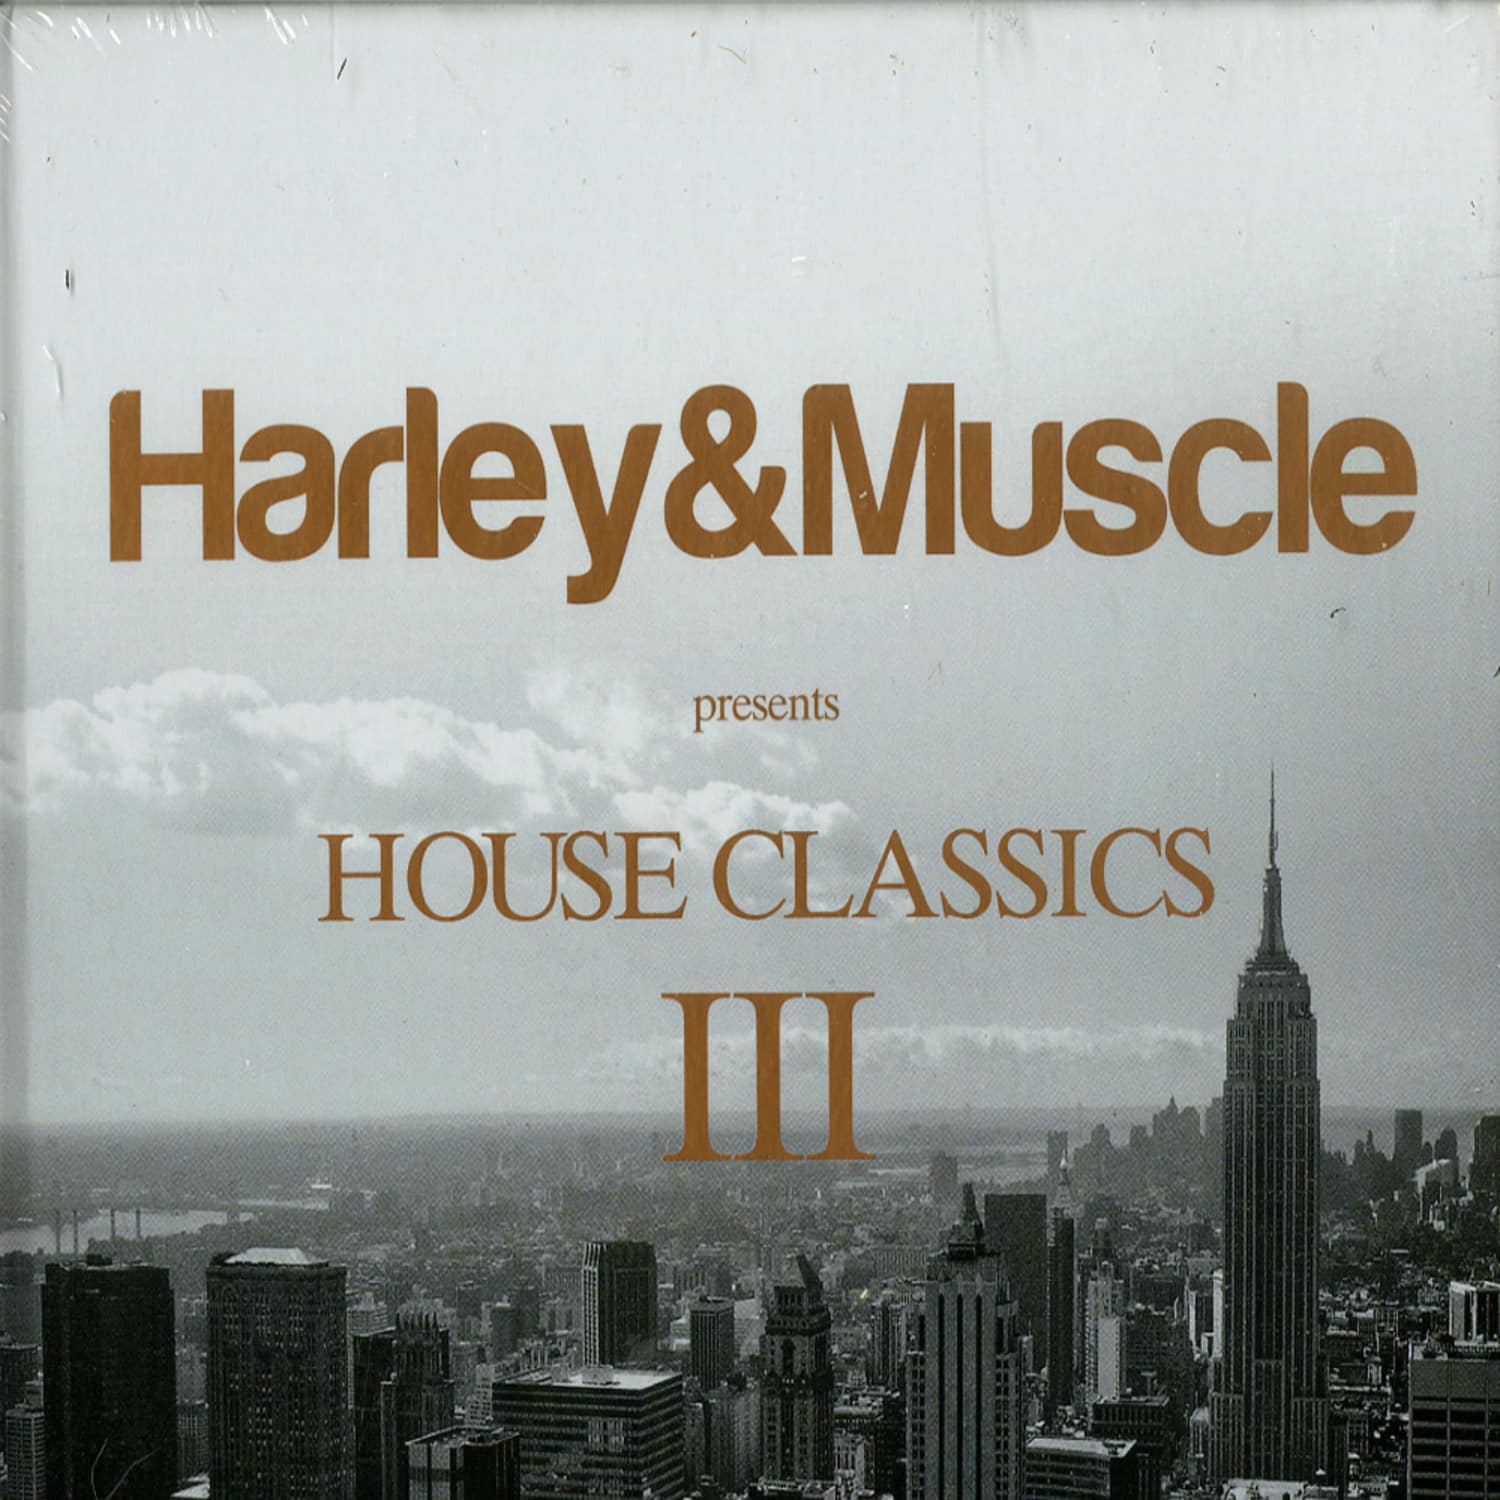 Harley & Muscle - HOUSE CLASSICS 3 